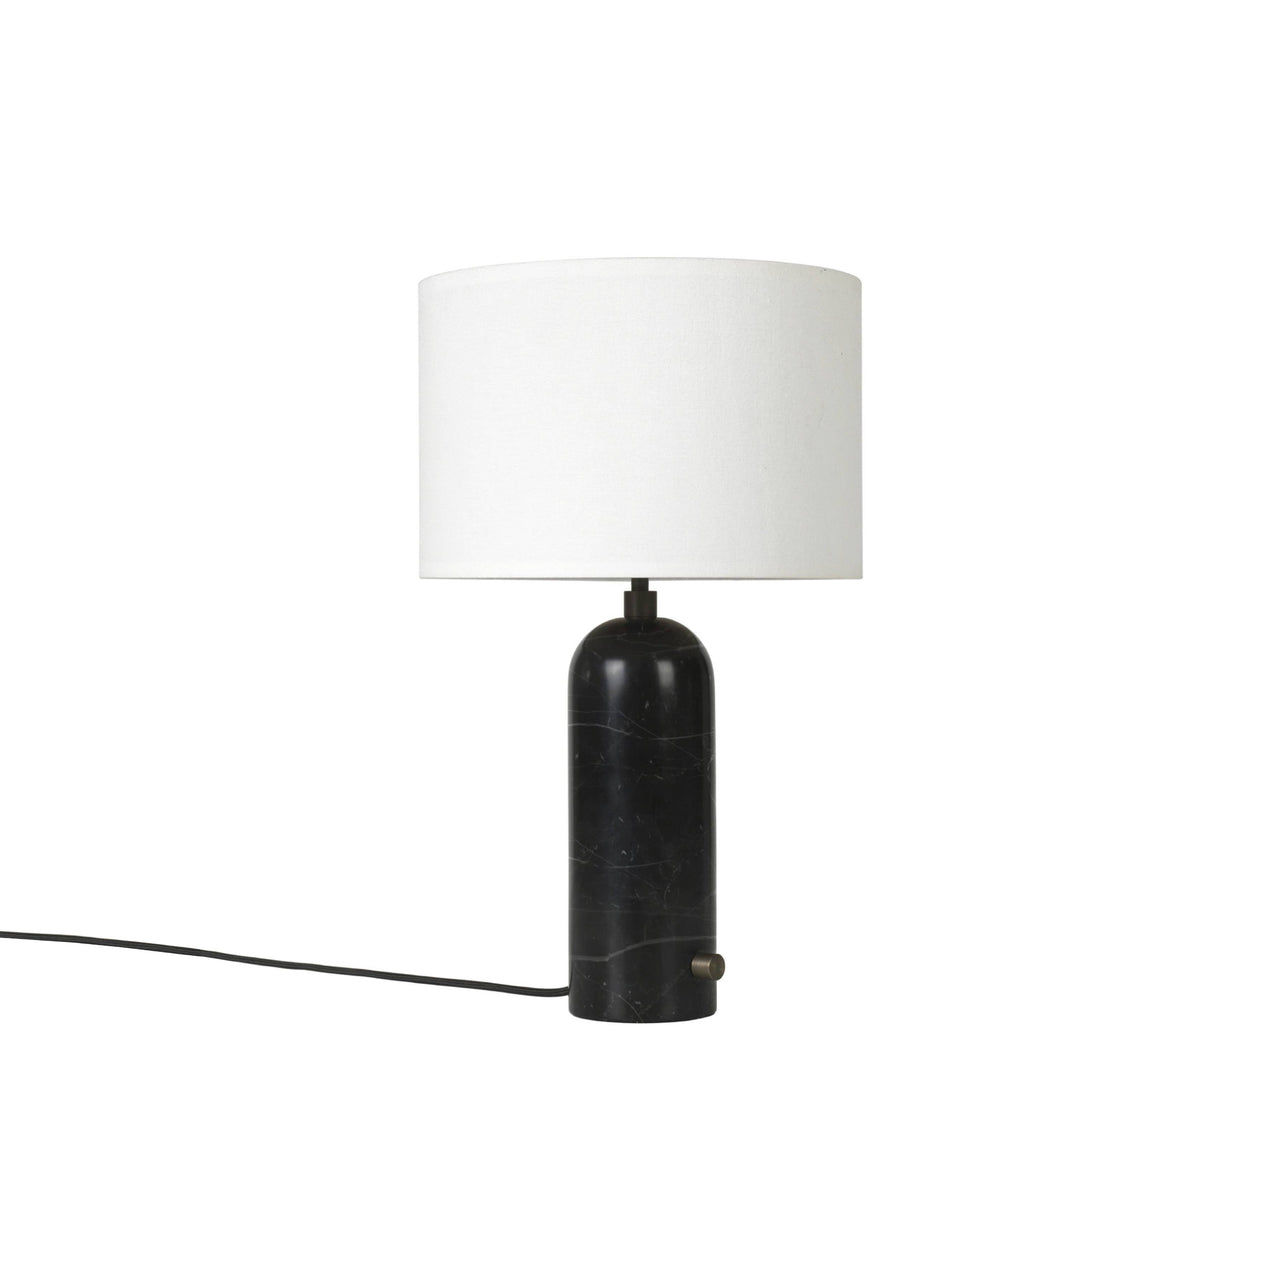 Gravity Table Lamp: Small - 11.8